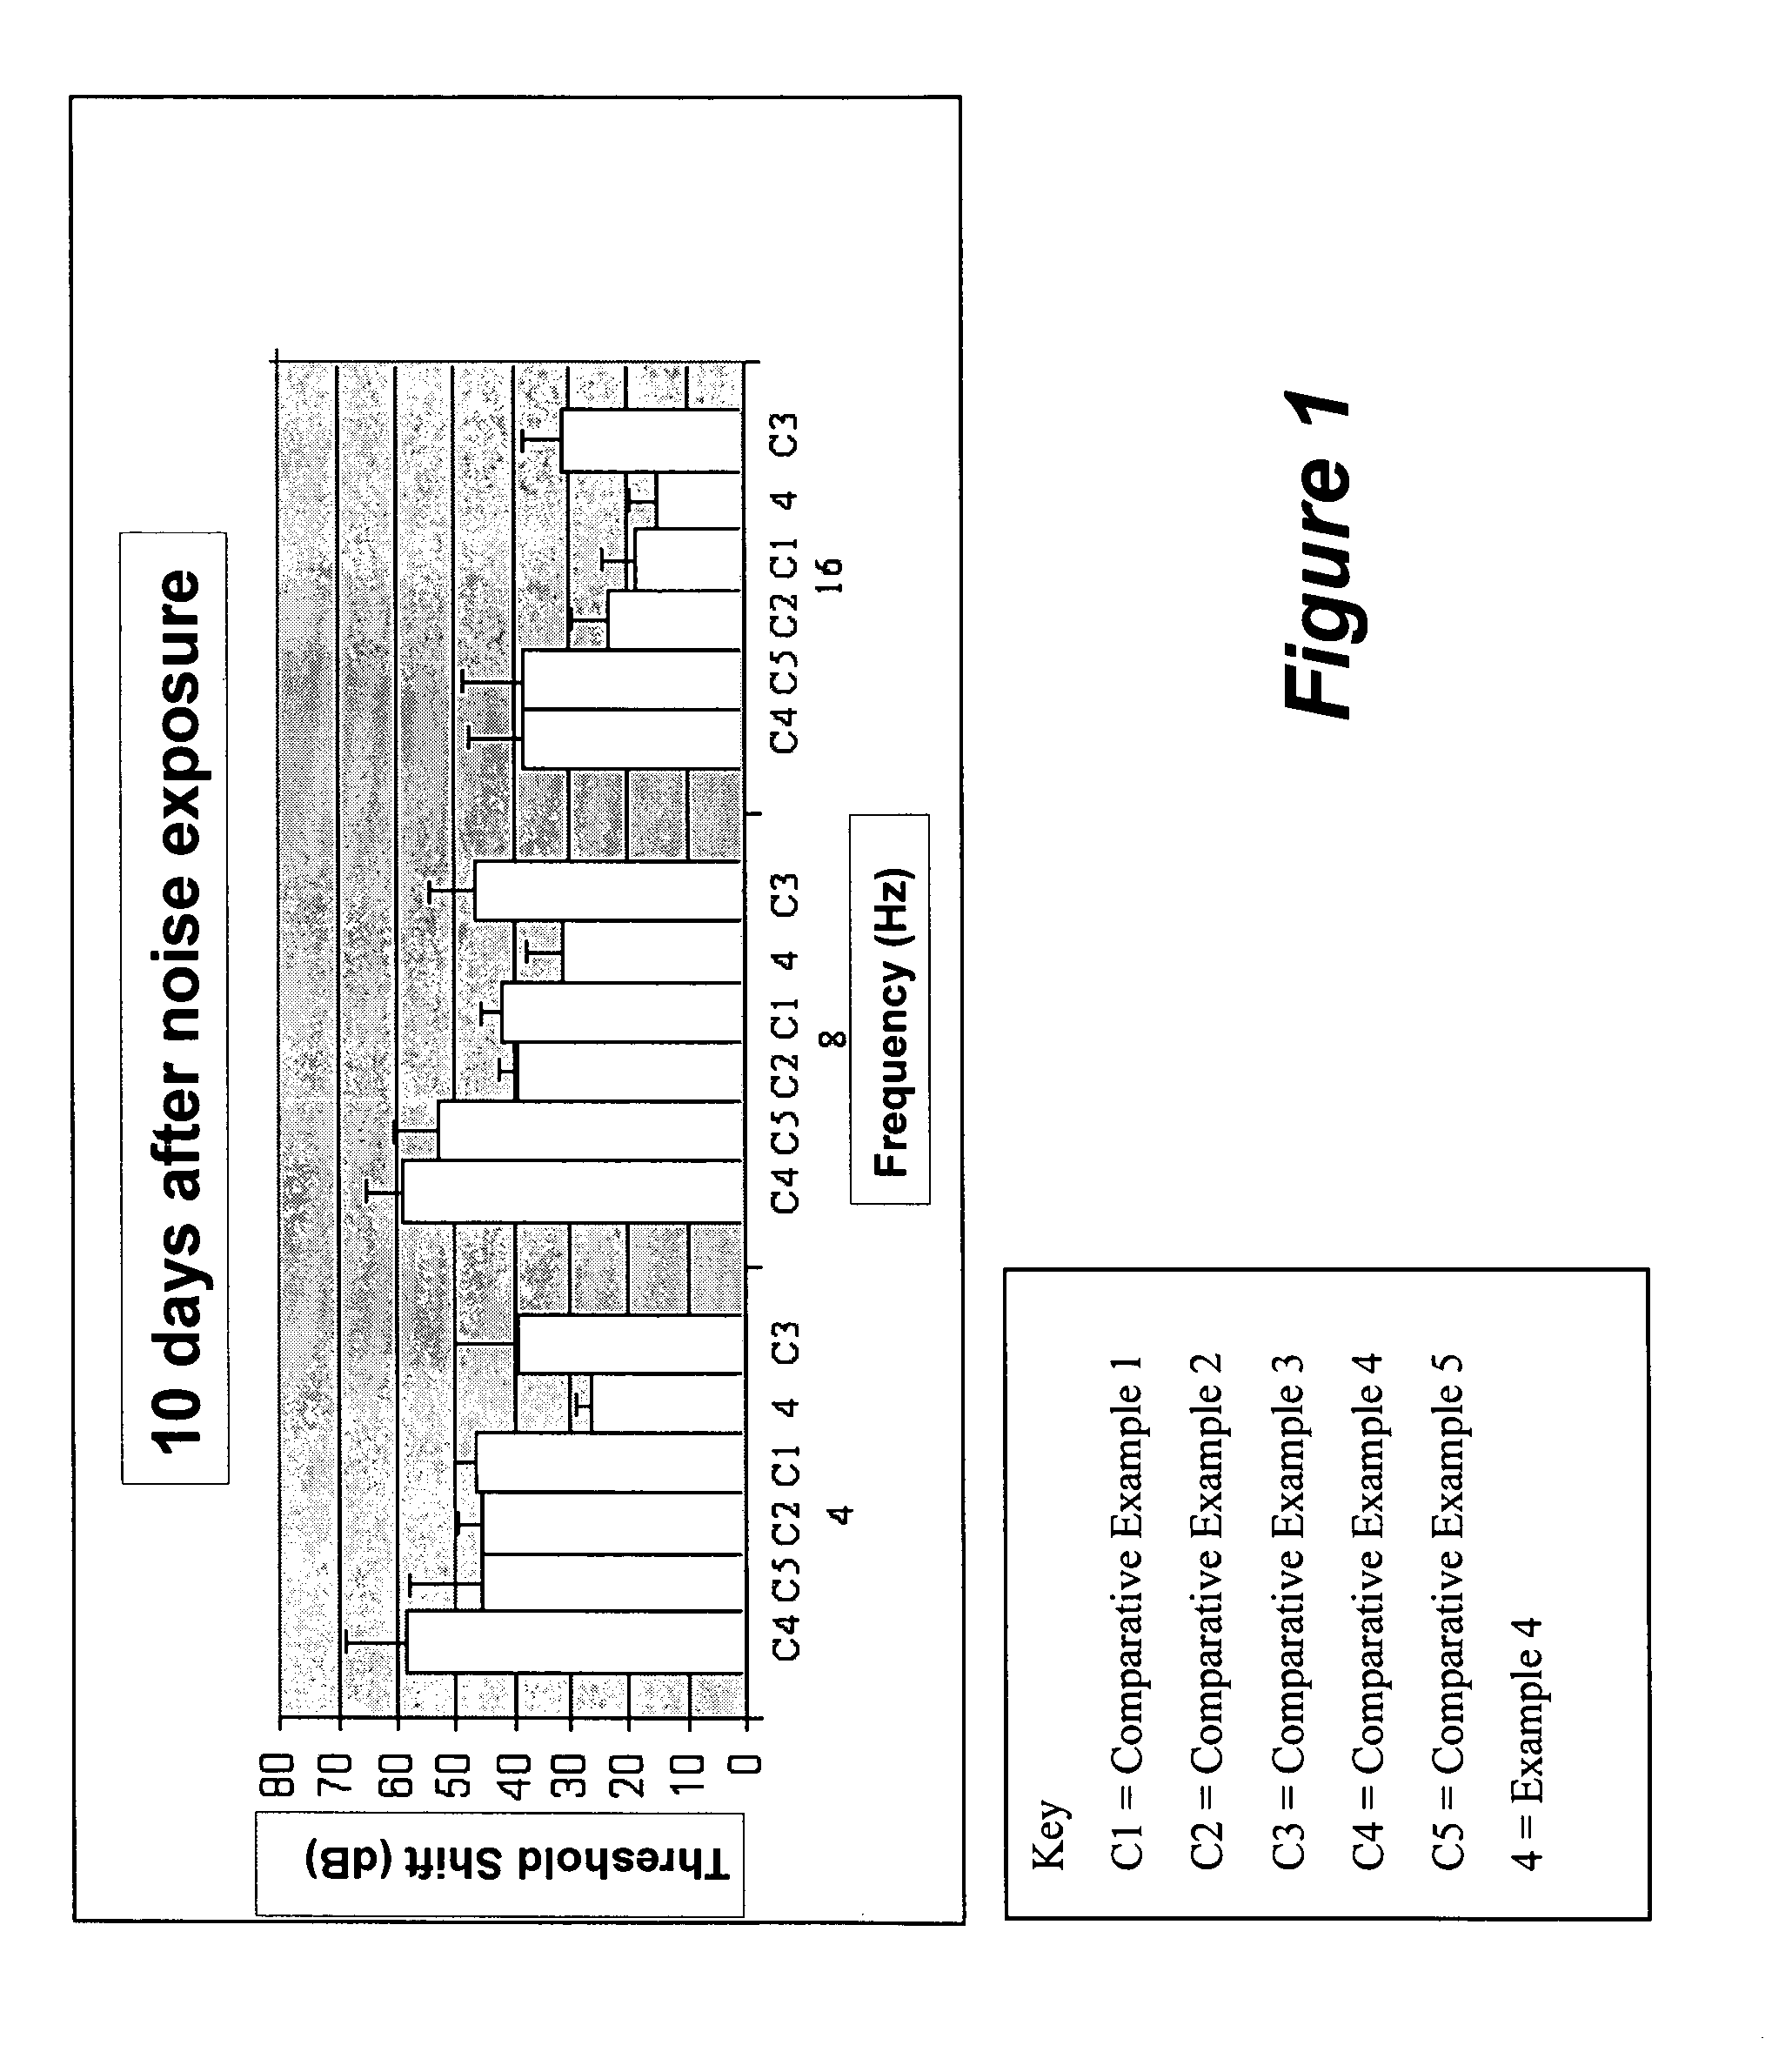 Composition and method of treating hearing loss